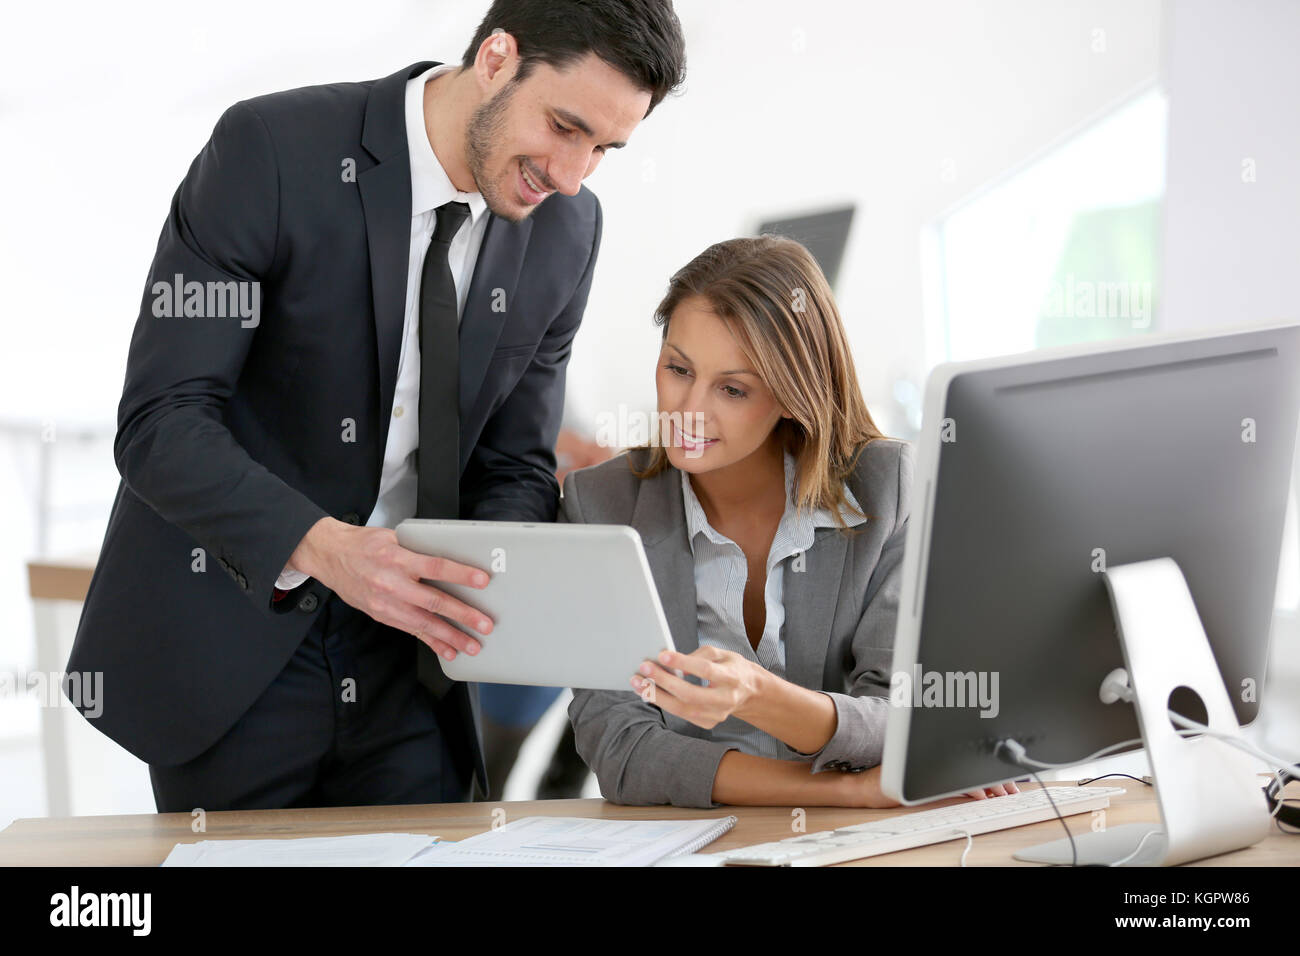 Business people in office working on tablet Stock Photo